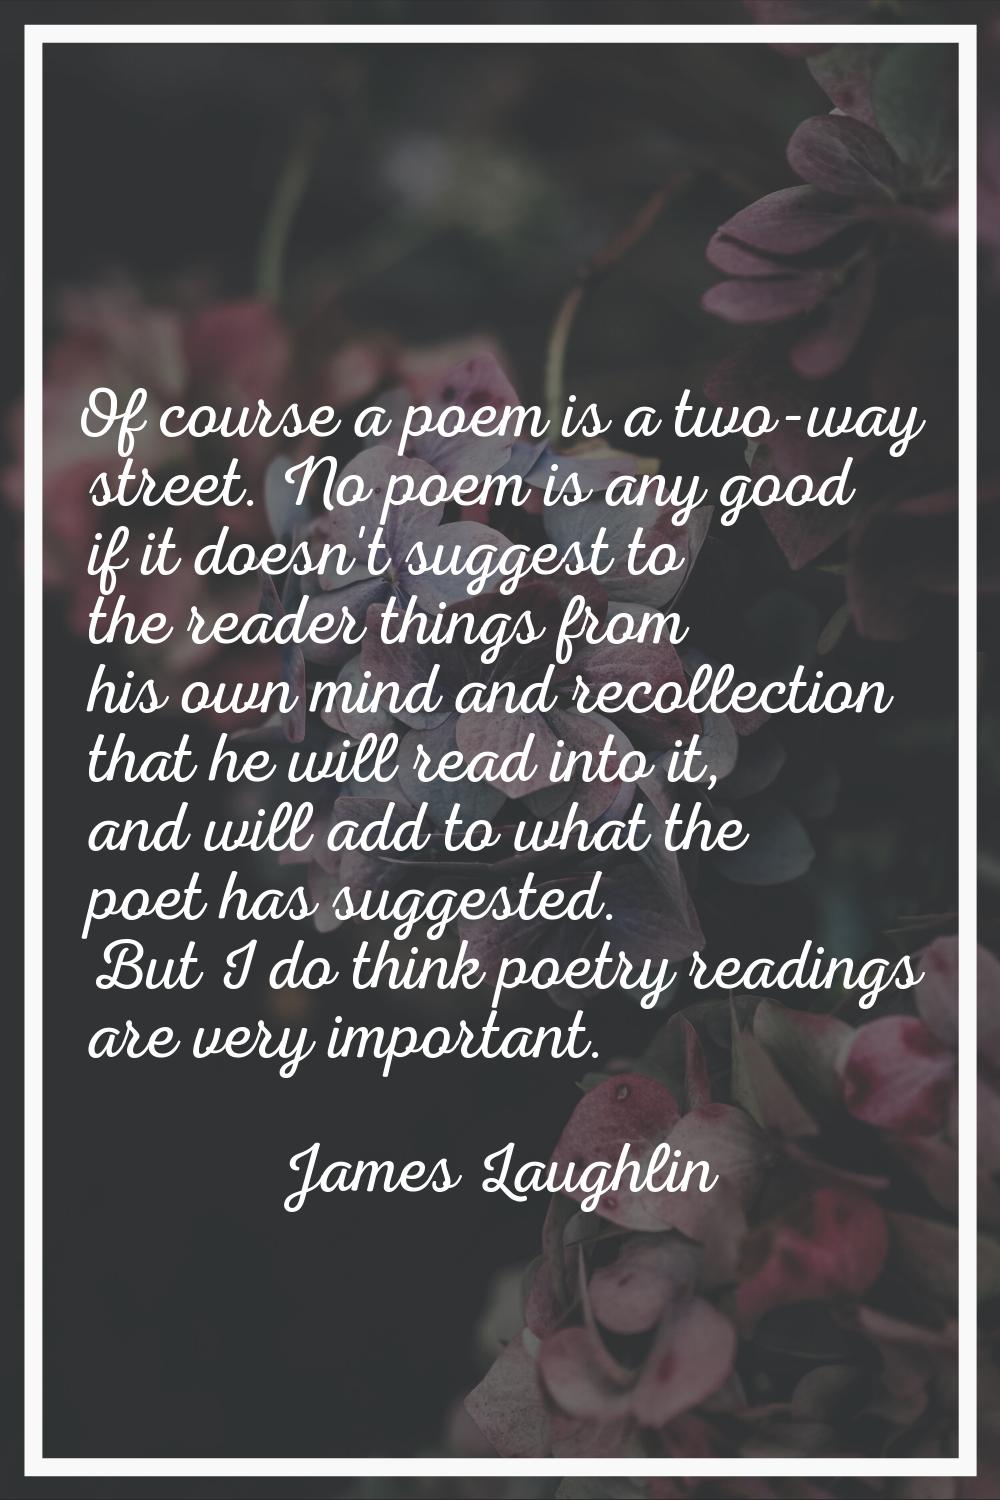 Of course a poem is a two-way street. No poem is any good if it doesn't suggest to the reader thing